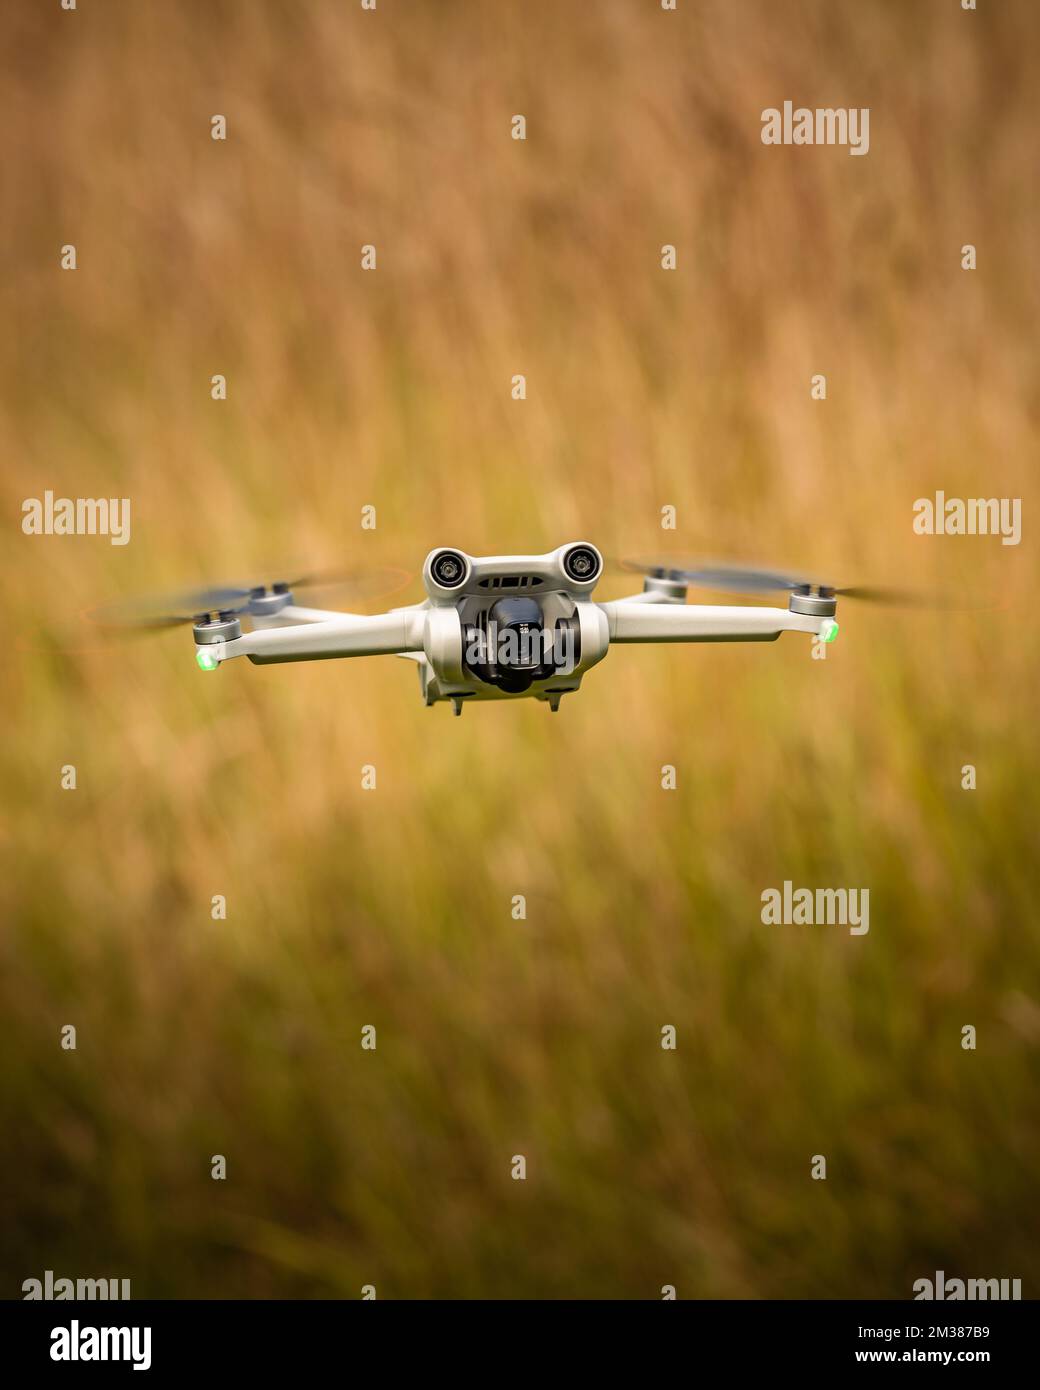 A selective vertical shot of a quadcopter flying over a blurry field Stock Photo